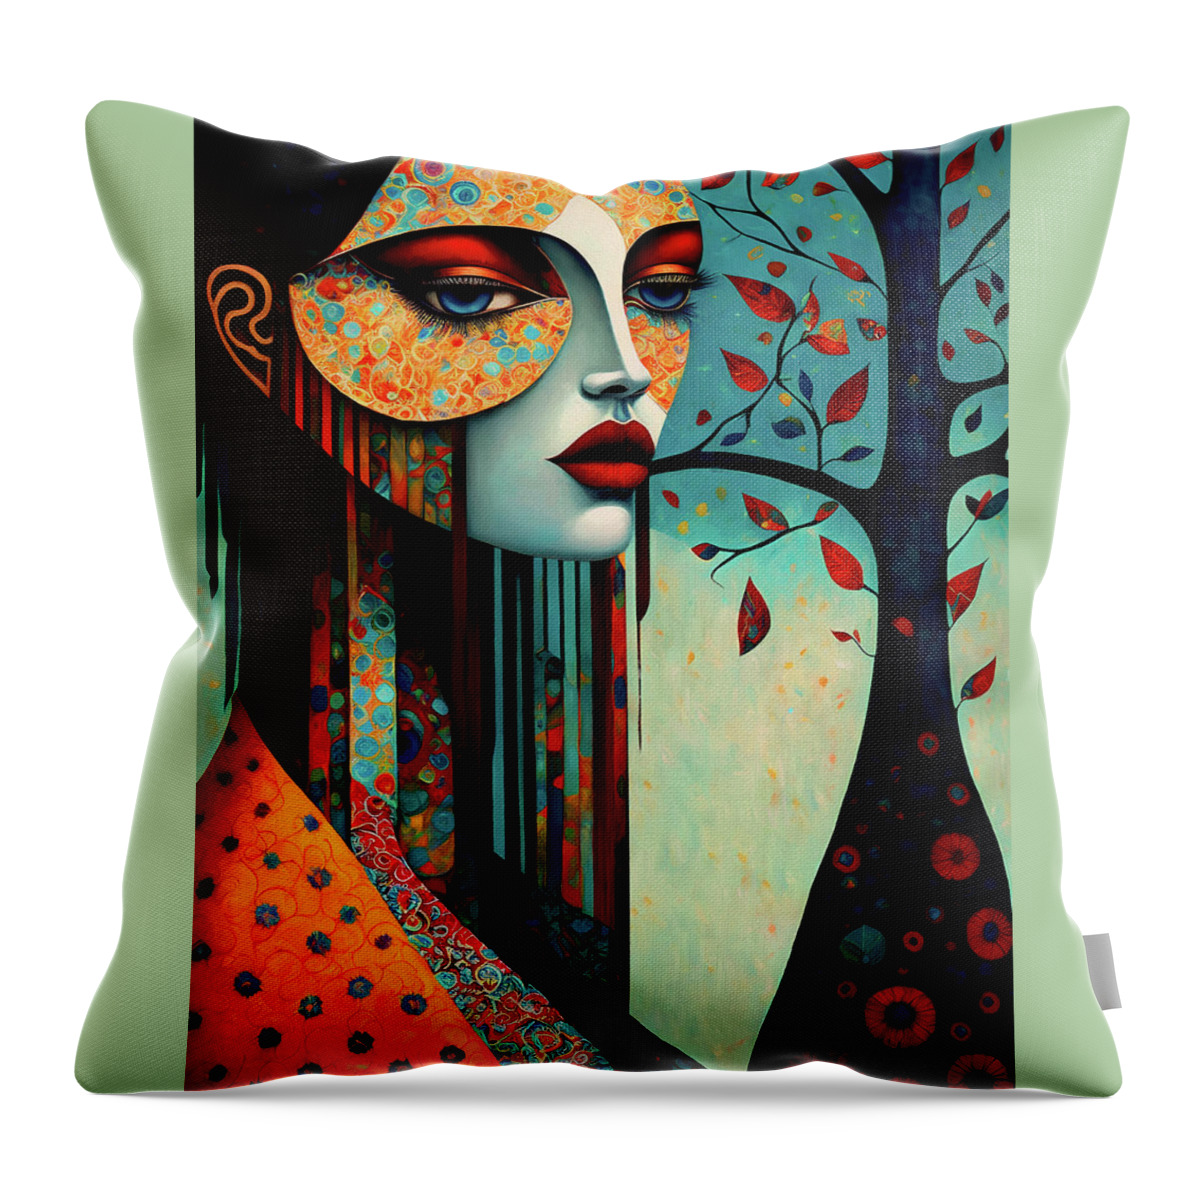 Tree Hugger Throw Pillow featuring the digital art Tree Hugger by Peggy Collins